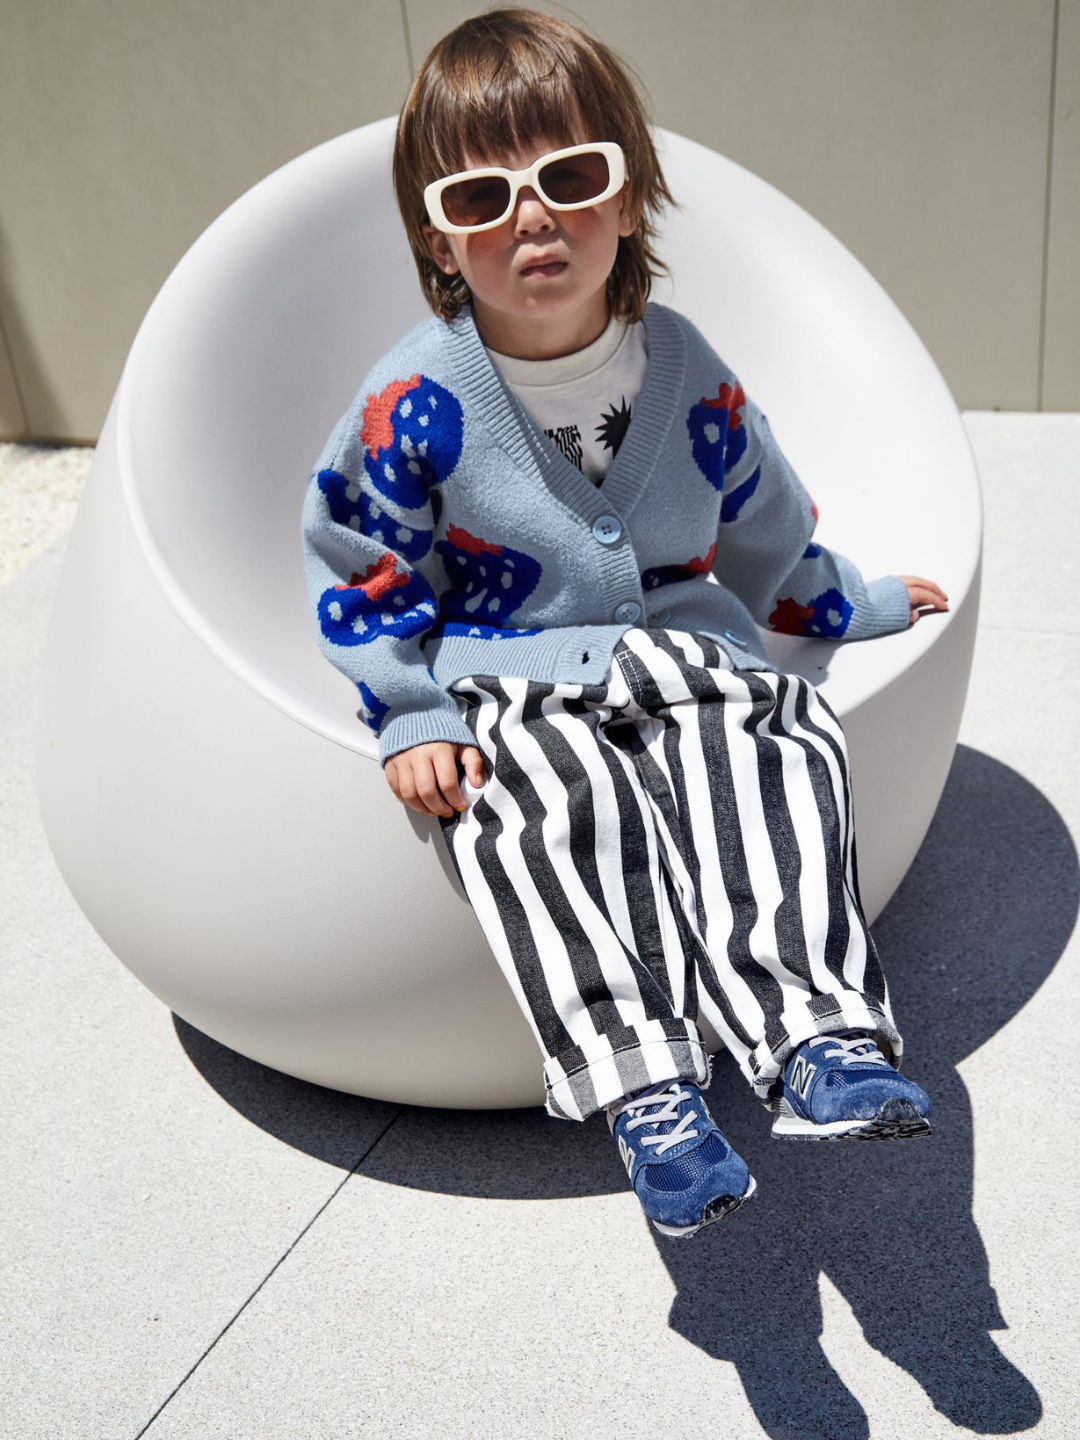 A child wearing a kids v-neck cardigan in light blue with an all-over pattern of large blue strawberries with a red leaf. He is seated on a round white chair in a paved outdoor space.